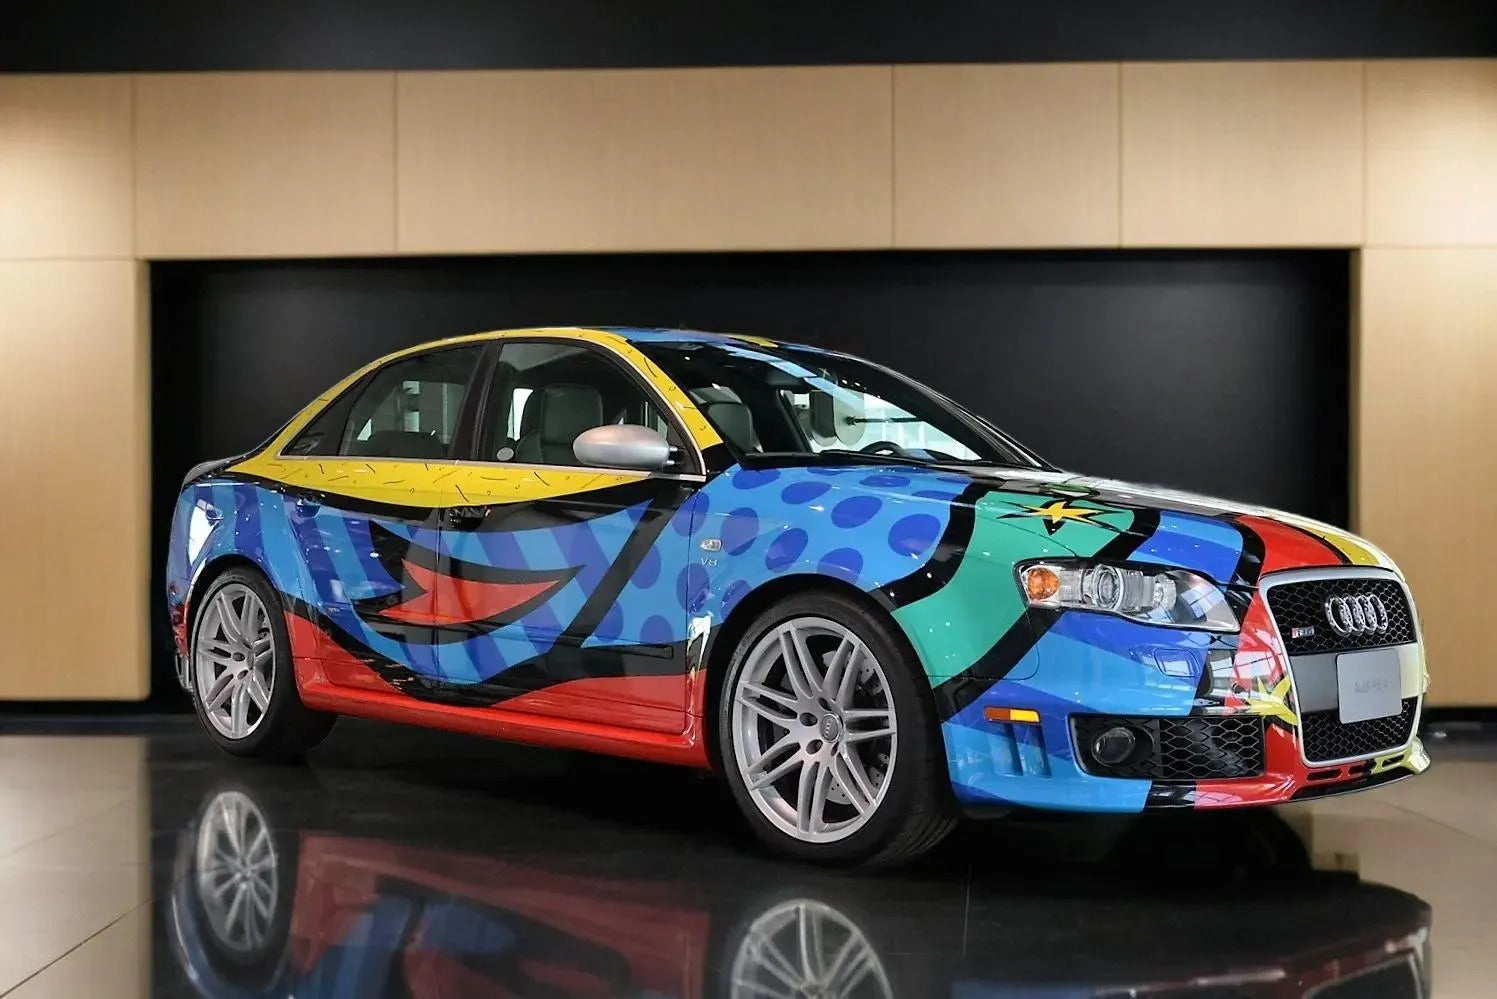 An Audi RS 4 Car with Romero Britto Art from the Audi Club North America.